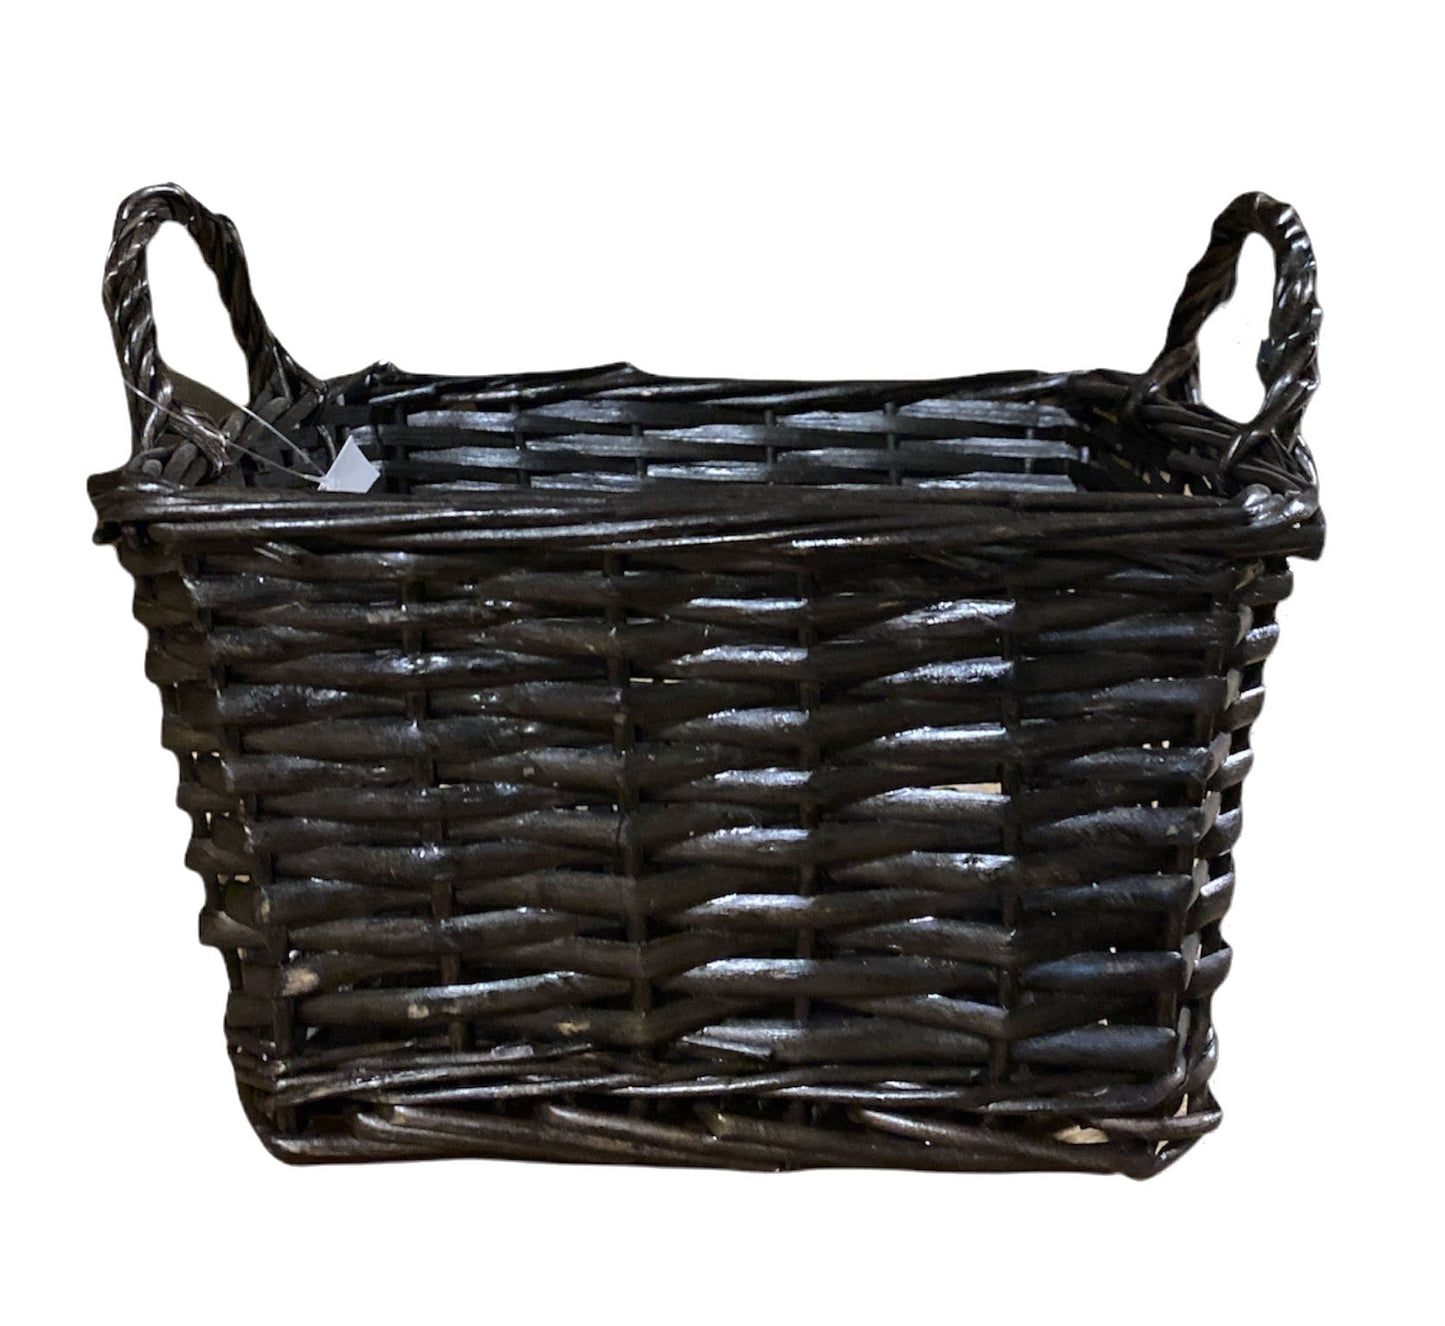 Square Willow Basket with Ear Handles - Black - 9.85 x 9.85 x 5.5 inches deep - Fits a 20x30 bag - Tapers to 7.25 inch Square Base & 7 inch to top of Handle